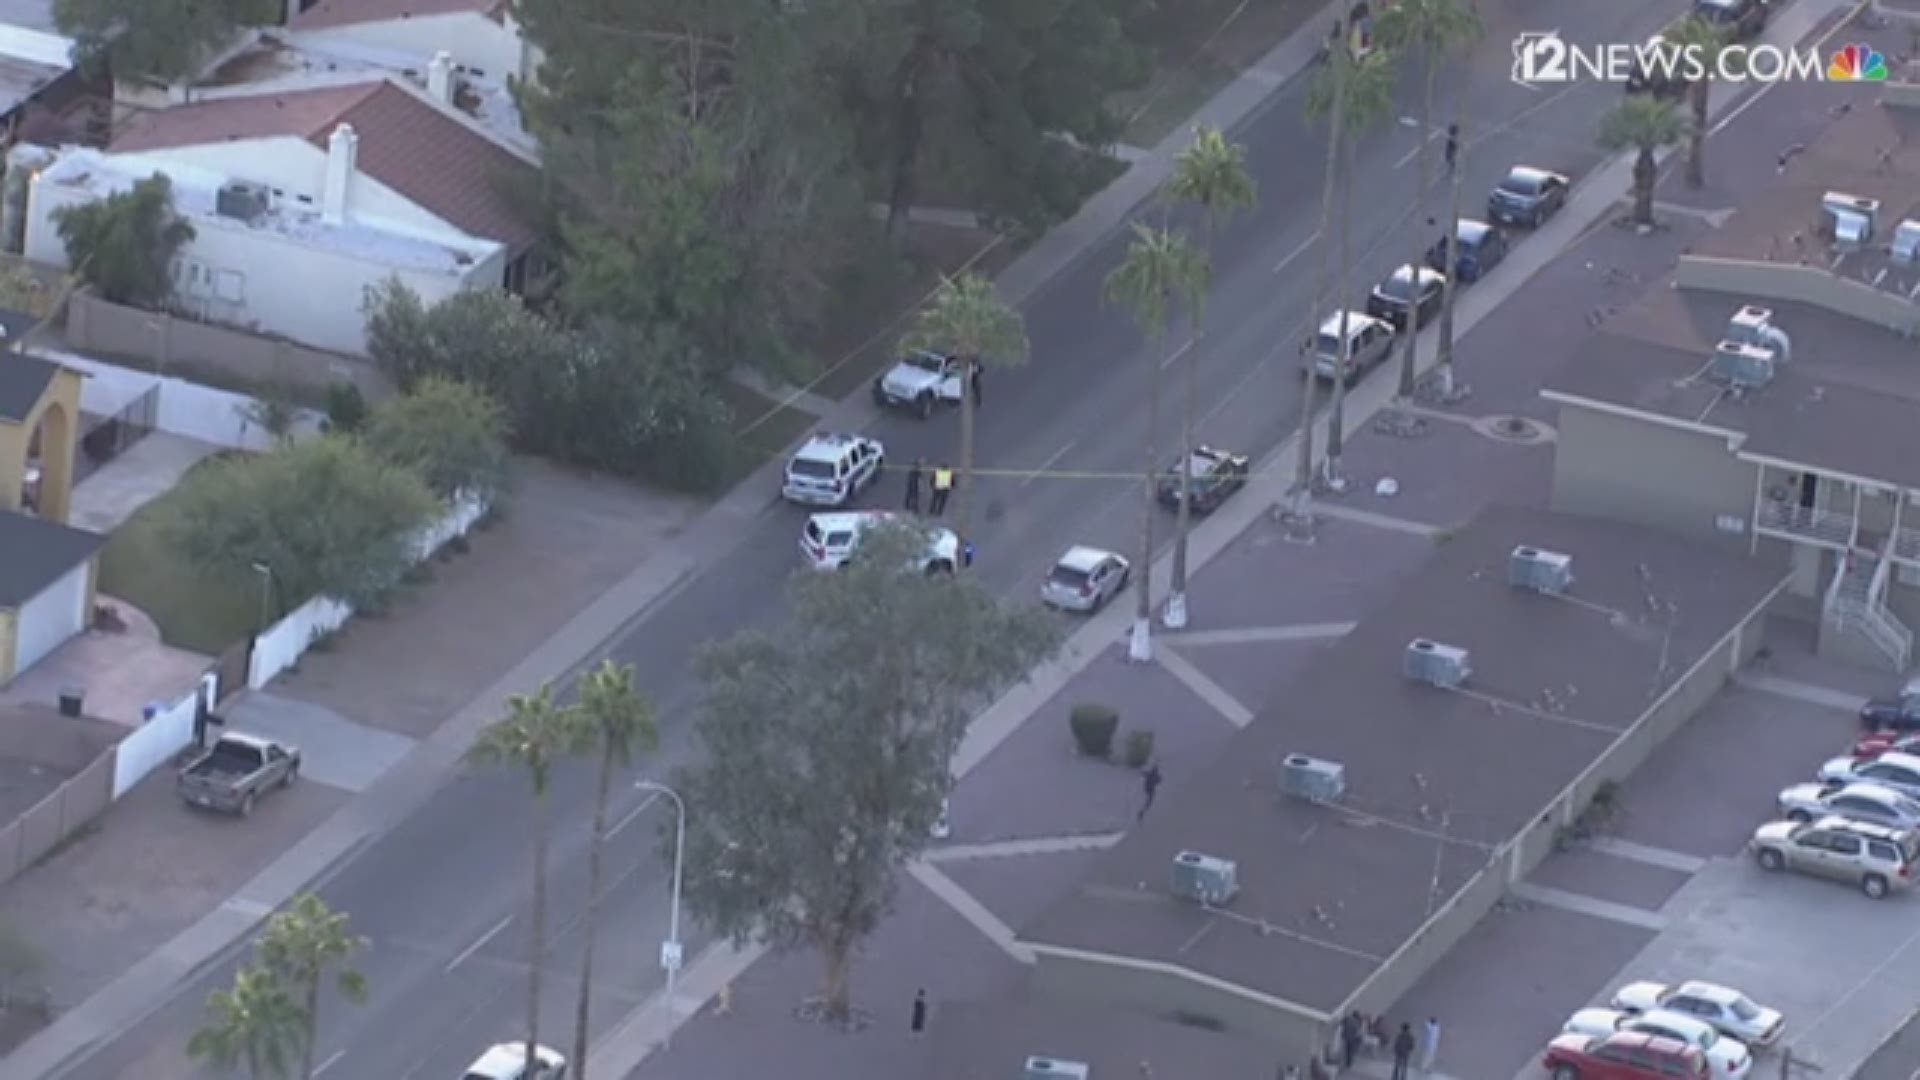 A young girl was struck by a car in Phoenix on Wednesday. Sky 12 is at the scene.